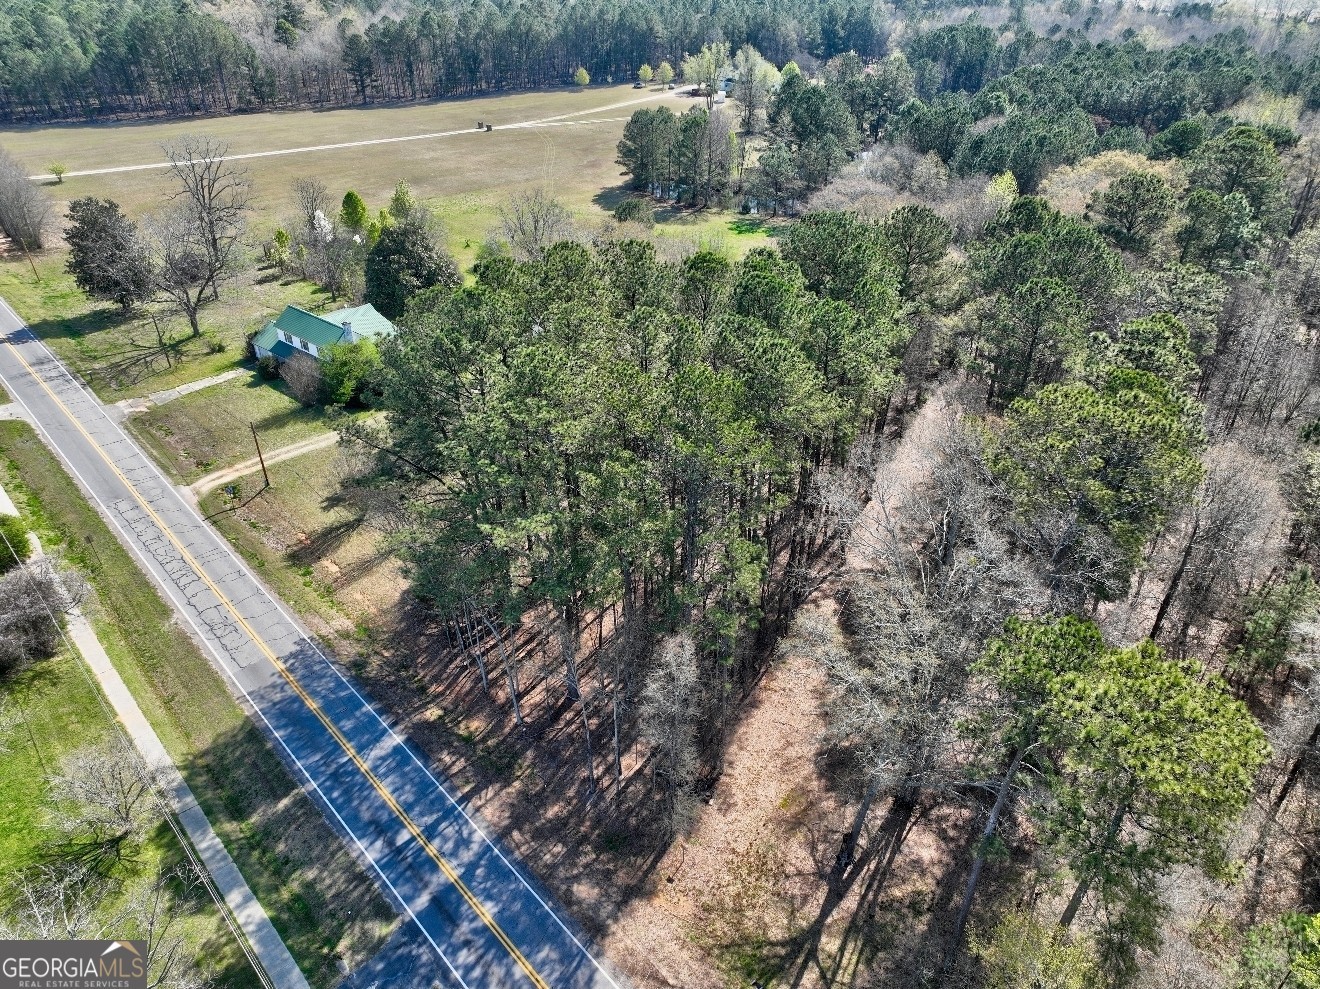 28. 205 Highway 186 Tract 1